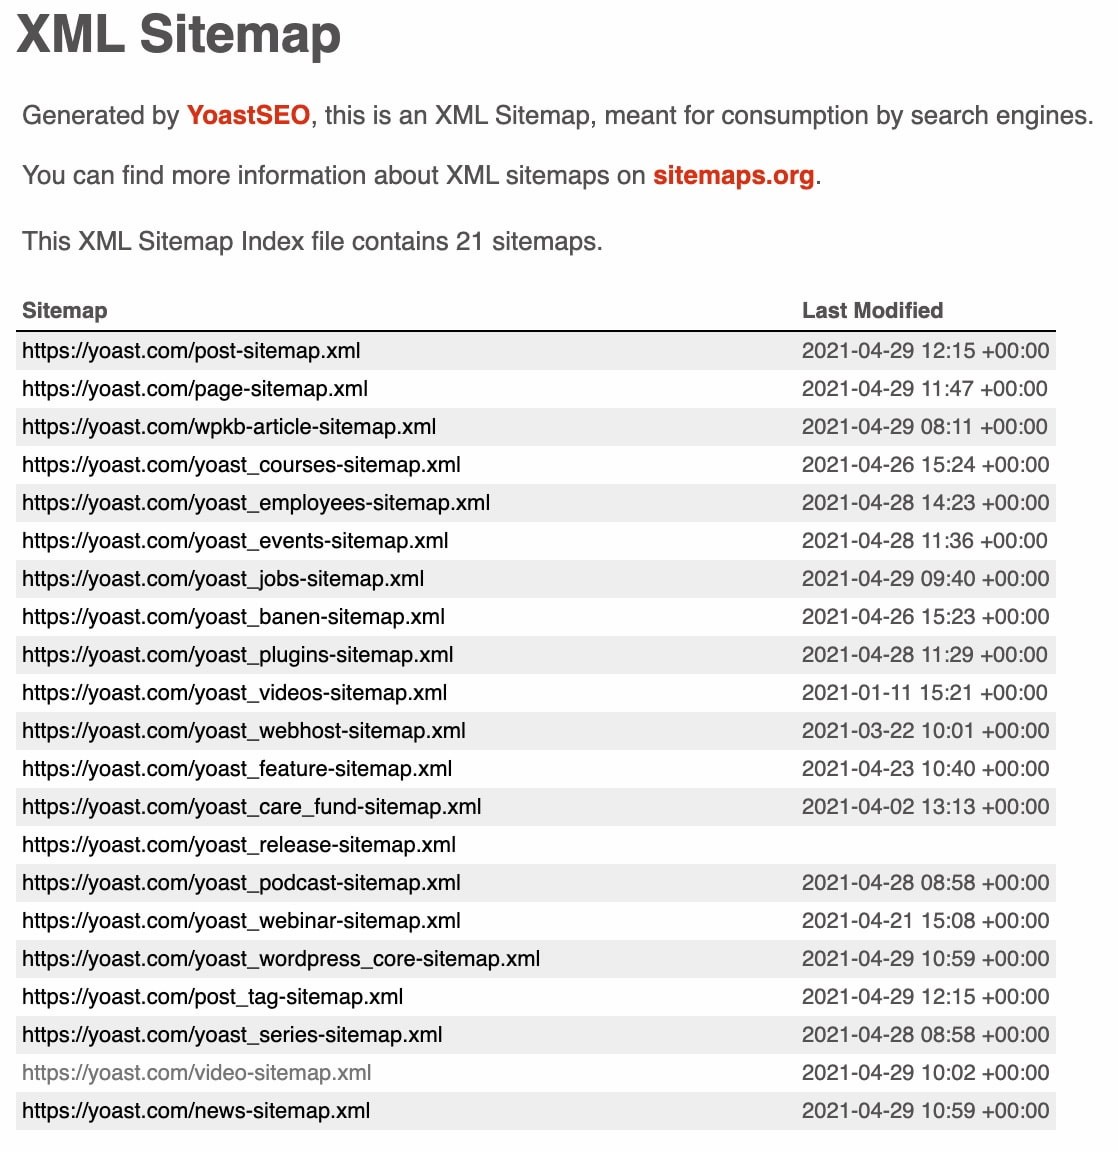 XML Sitemaps are intended for search engine crawlers. They list all relevant pages of your site in a format that's easy for these crawlers to understand and index.